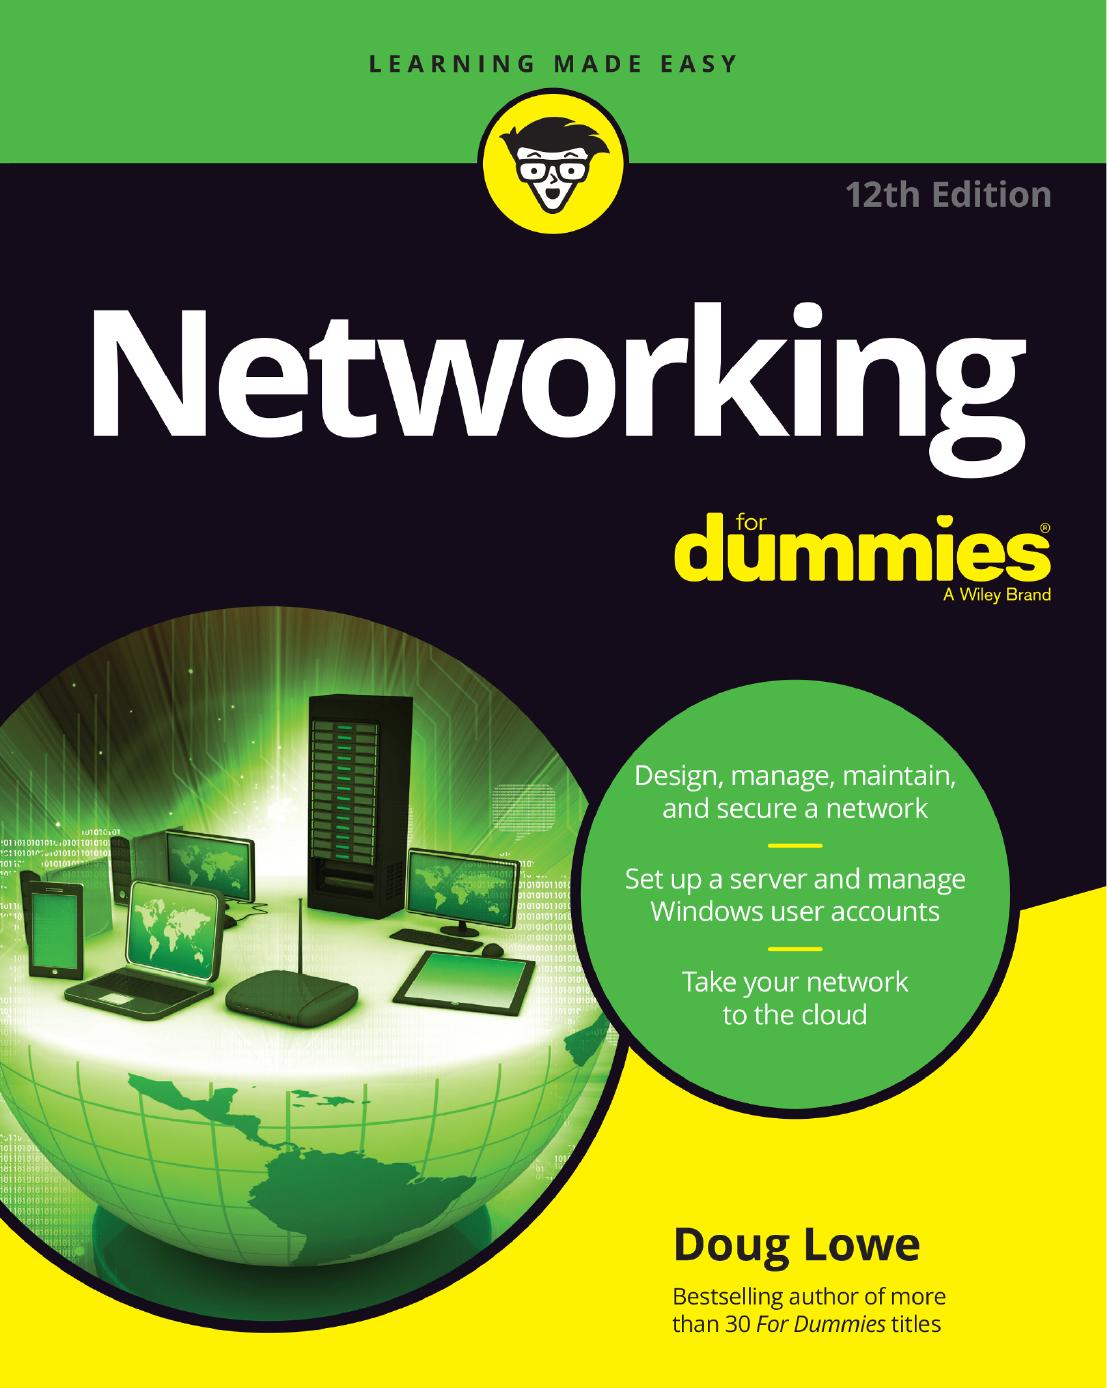 Networking For Dummies by Doug Lowe